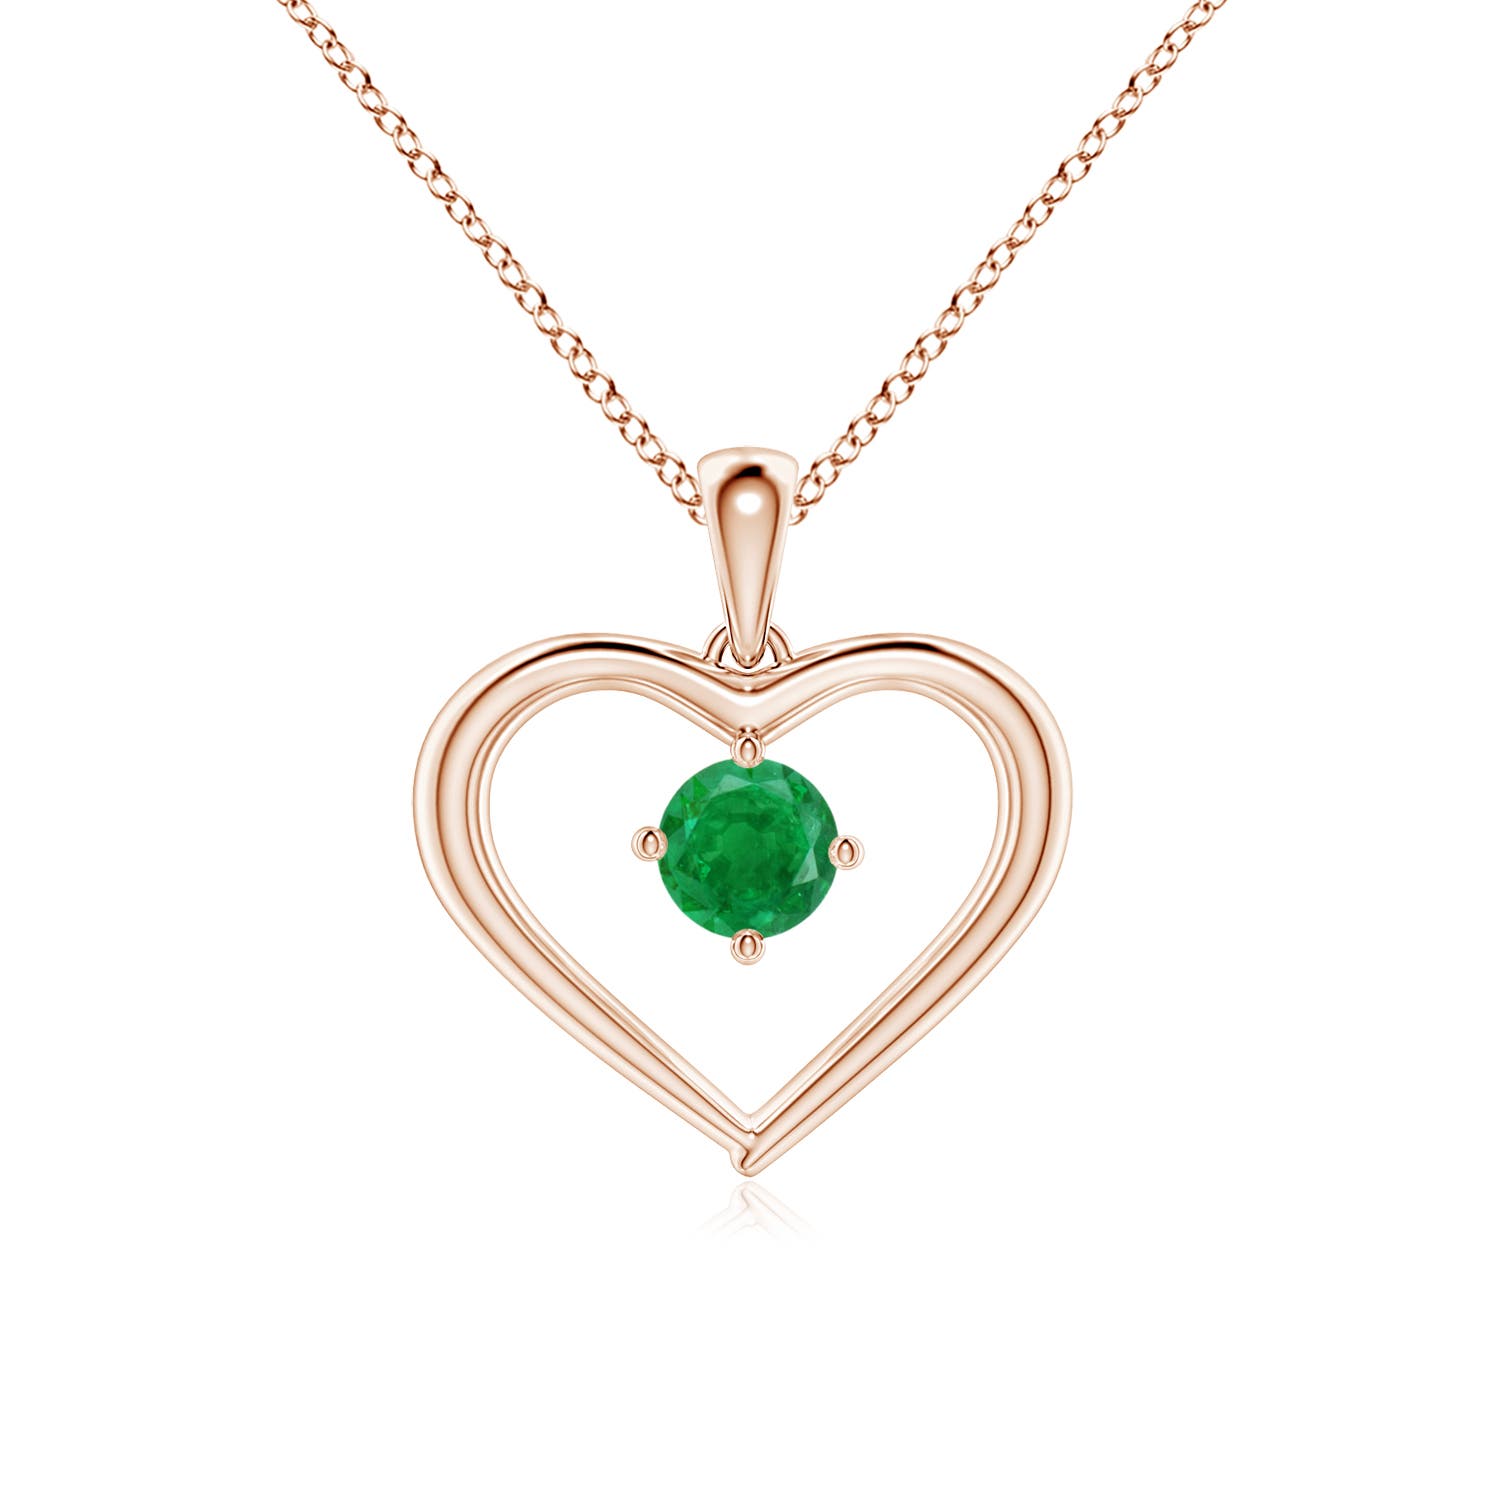 AA - Emerald / 0.24 CT / 14 KT Rose Gold